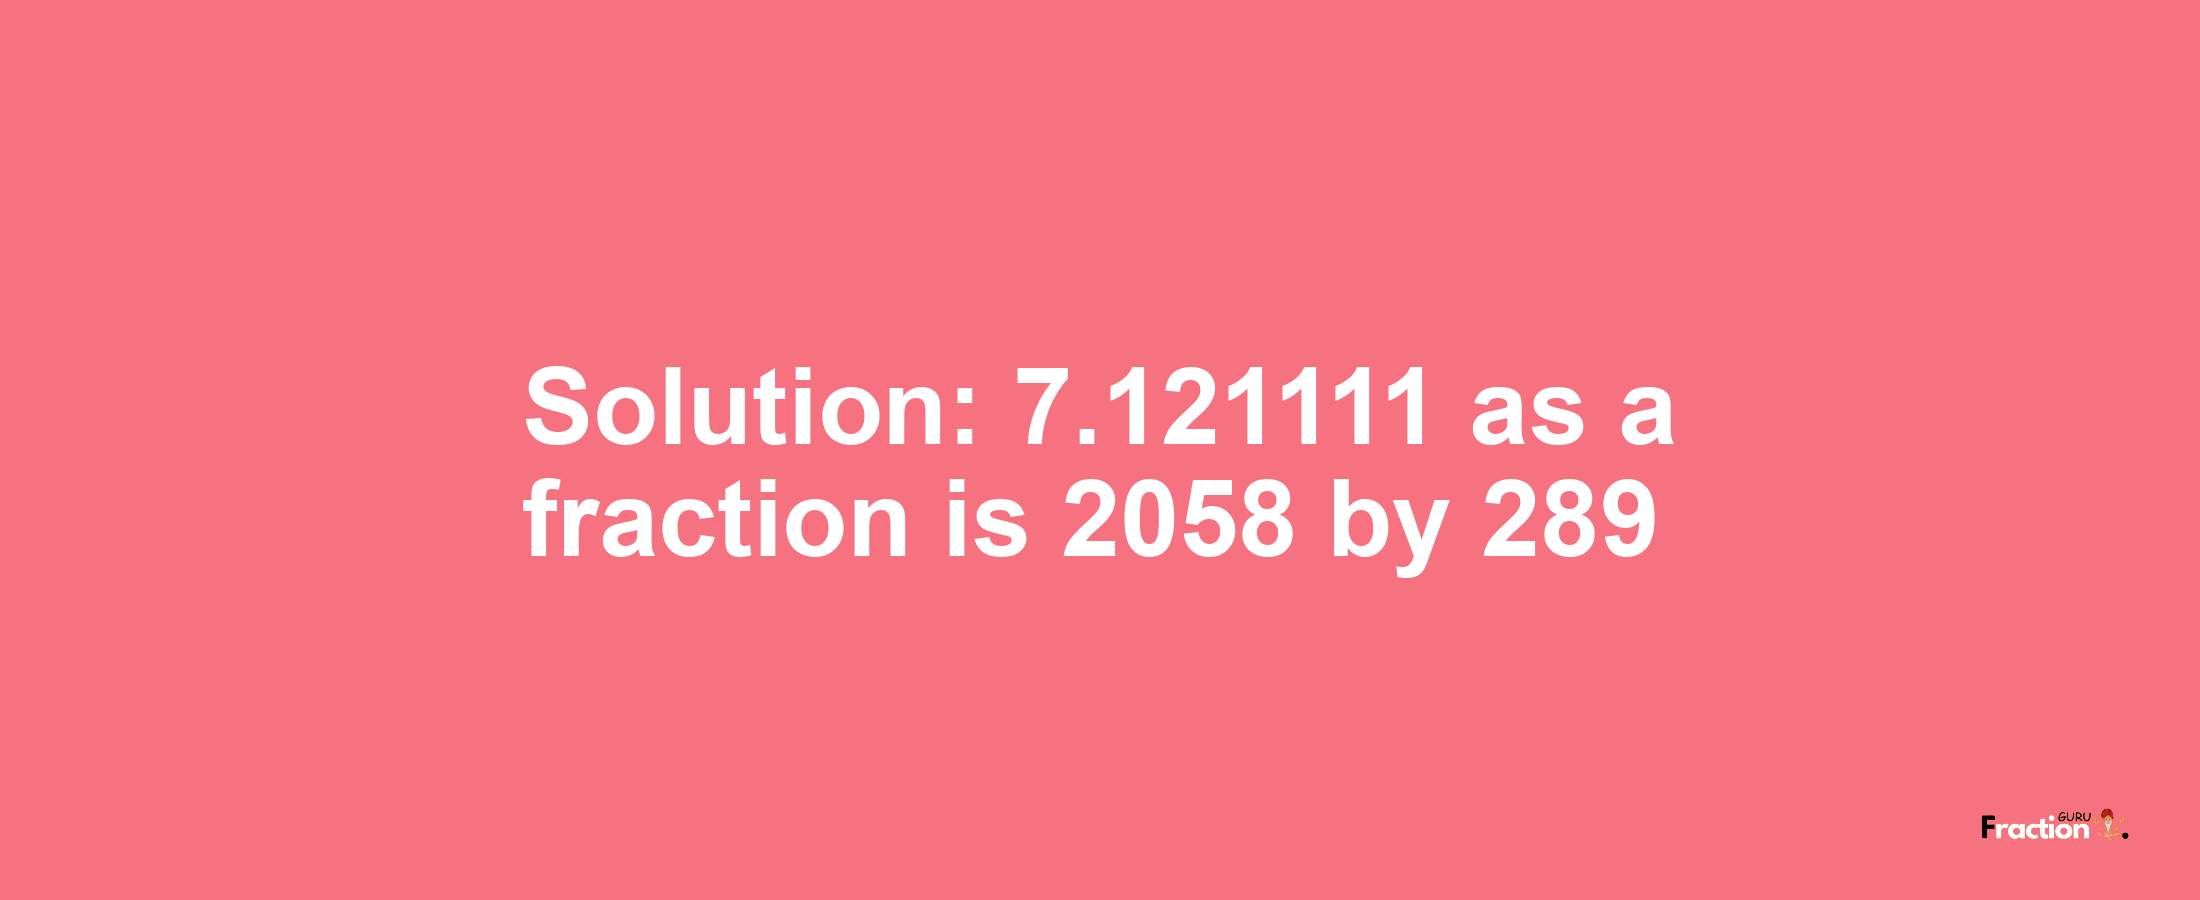 Solution:7.121111 as a fraction is 2058/289